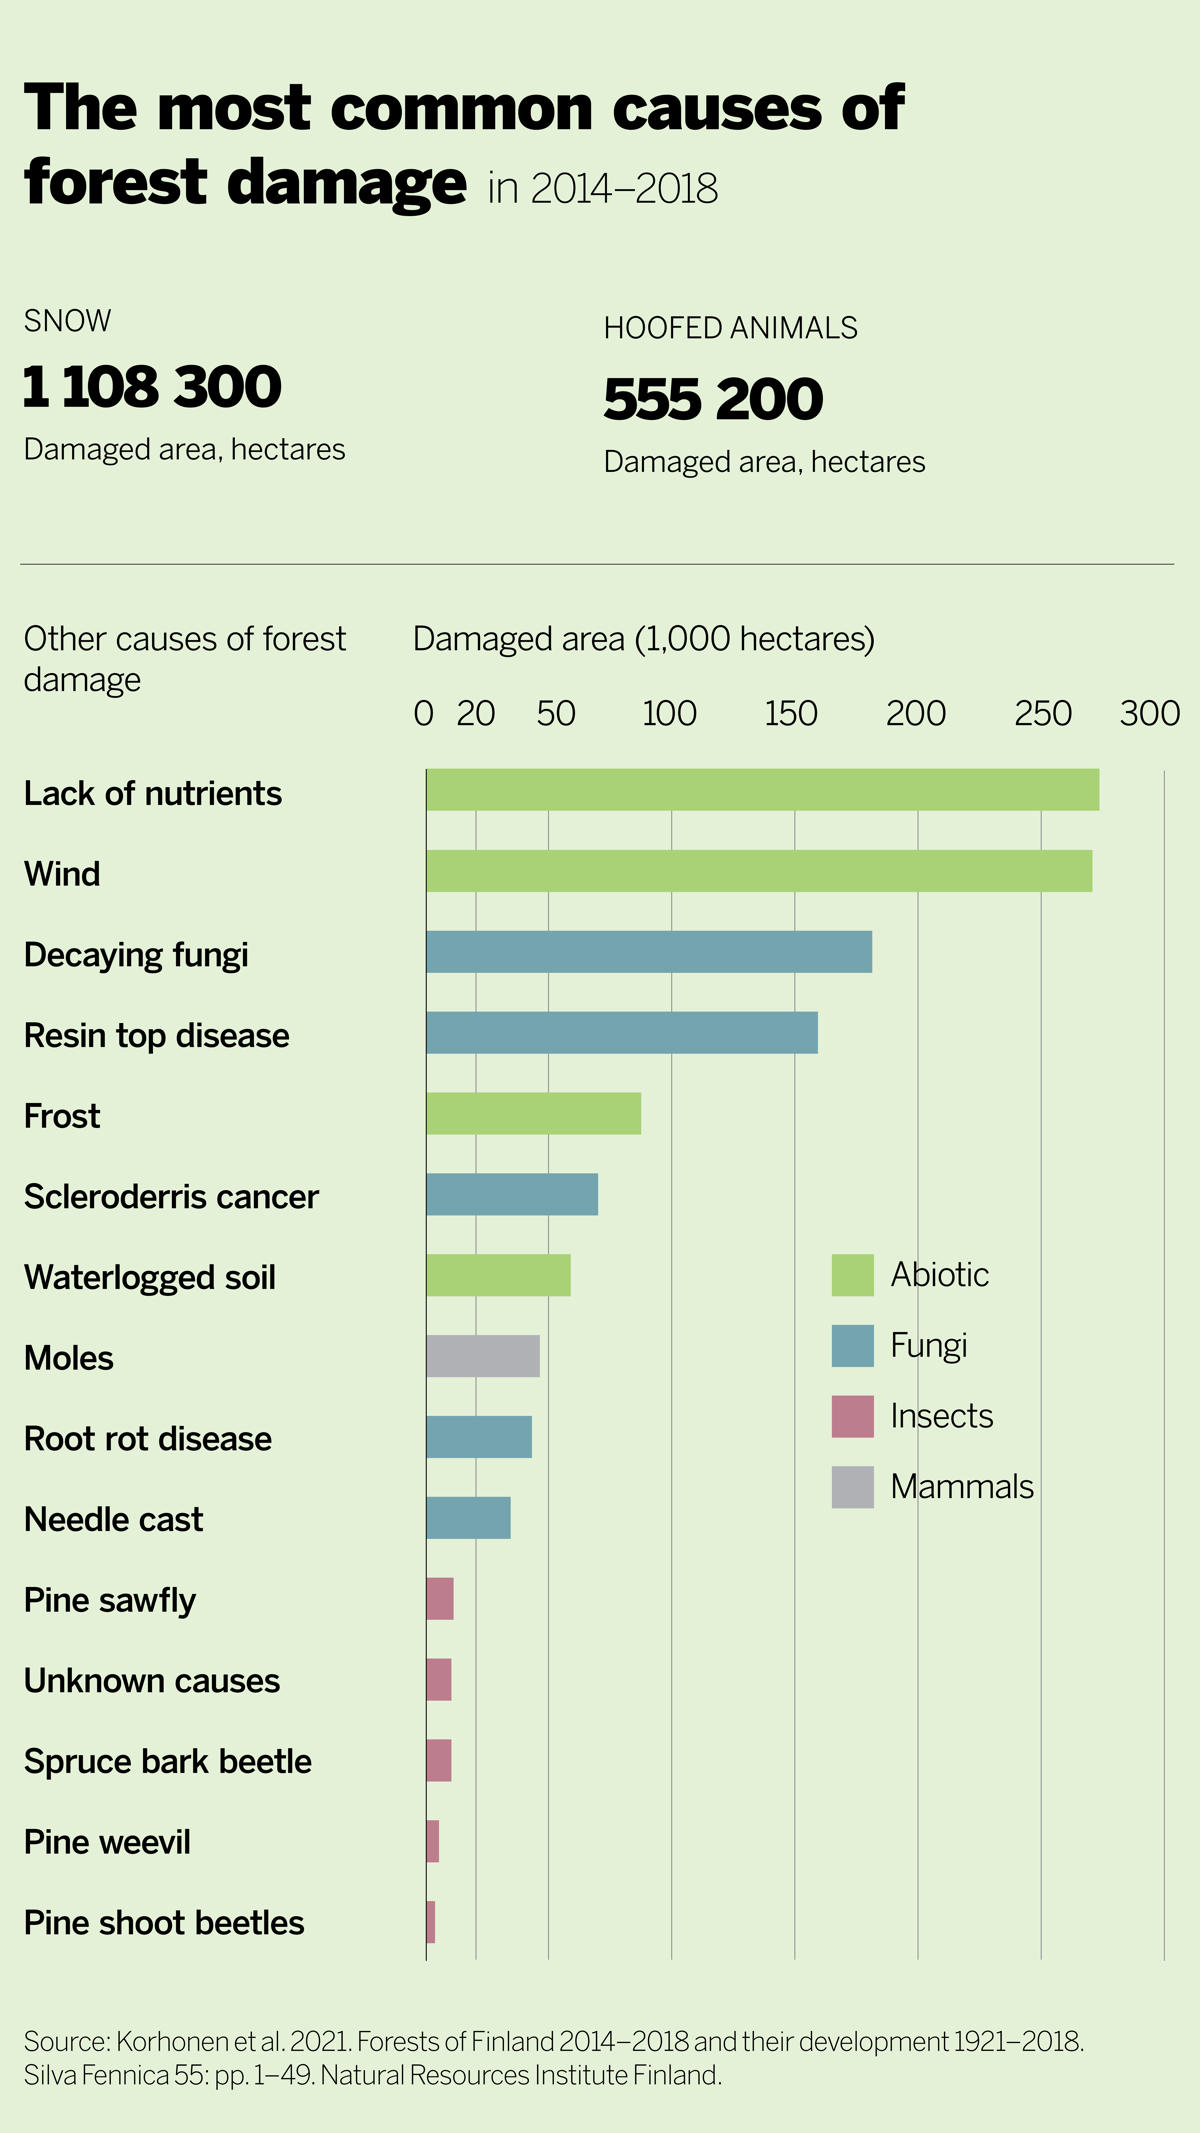 The most common causes of forest damage